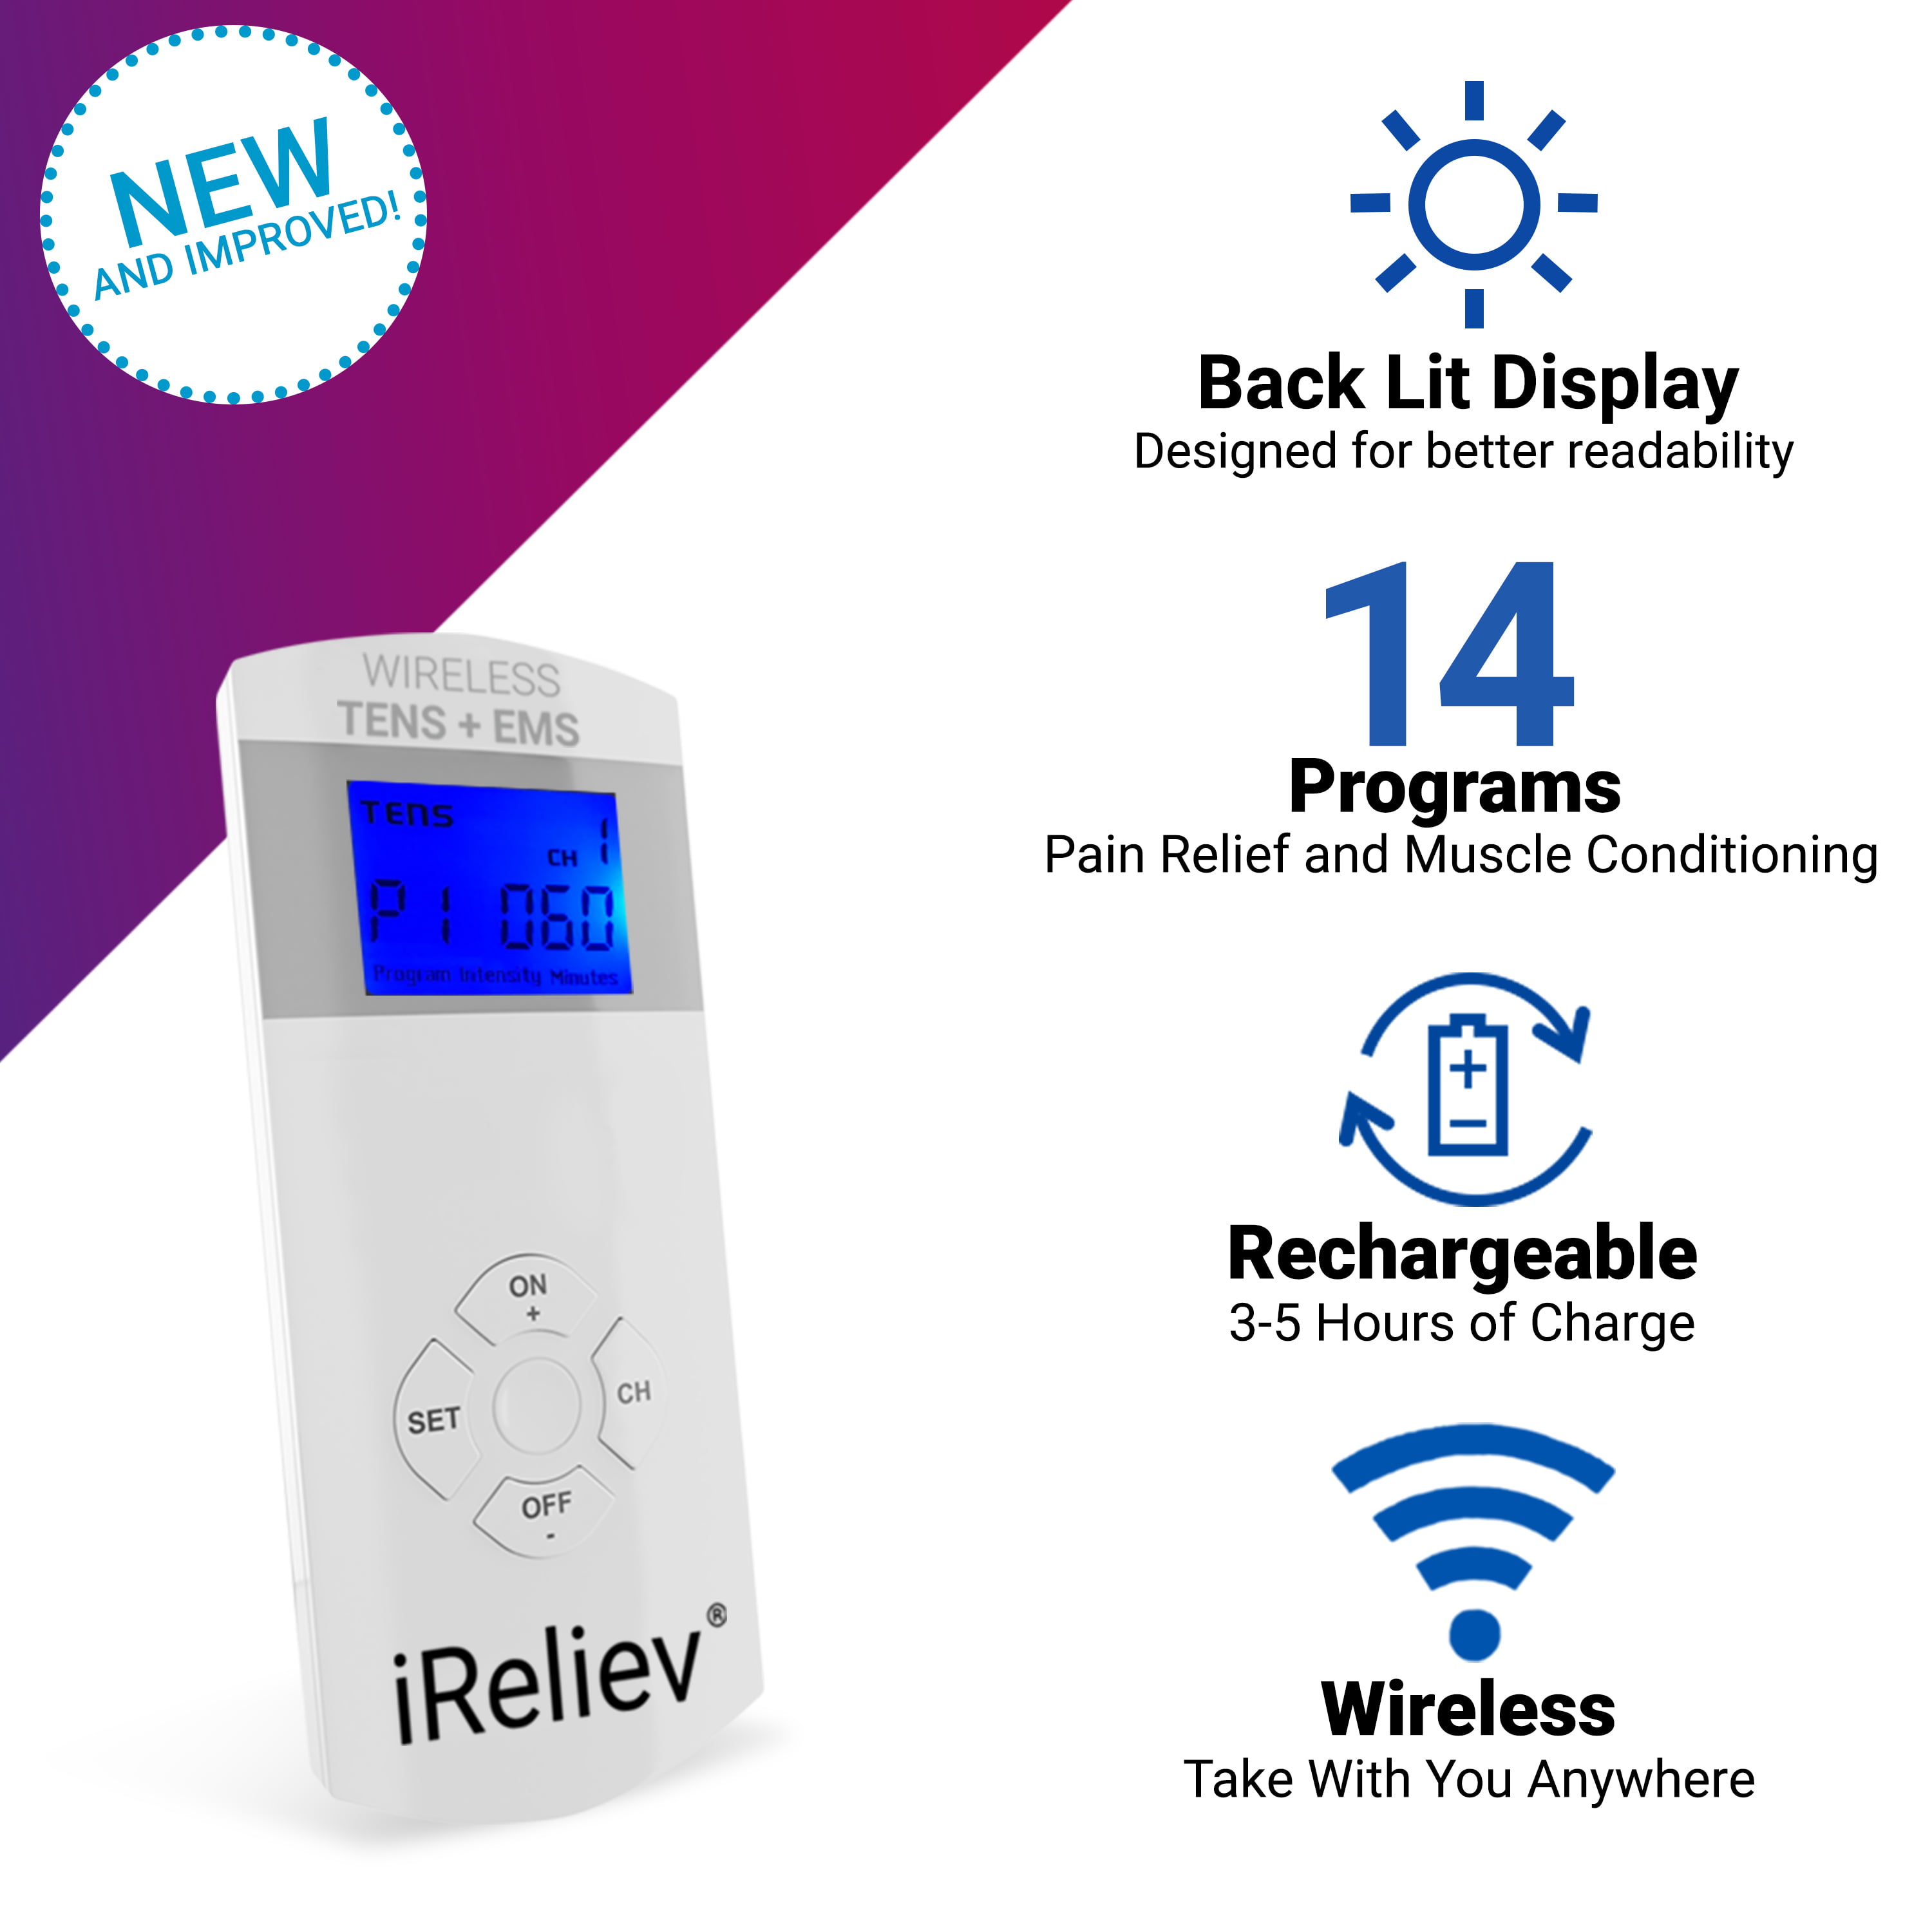  iReliev TENS & EMS Expandable Wireless Receiver Pods with Hard  Case - for Use with iReliev ET-5050 TENS + EMS Unit - Includes 2  Rechargeable Wireless Receiver Pods - ET-5050 Hand